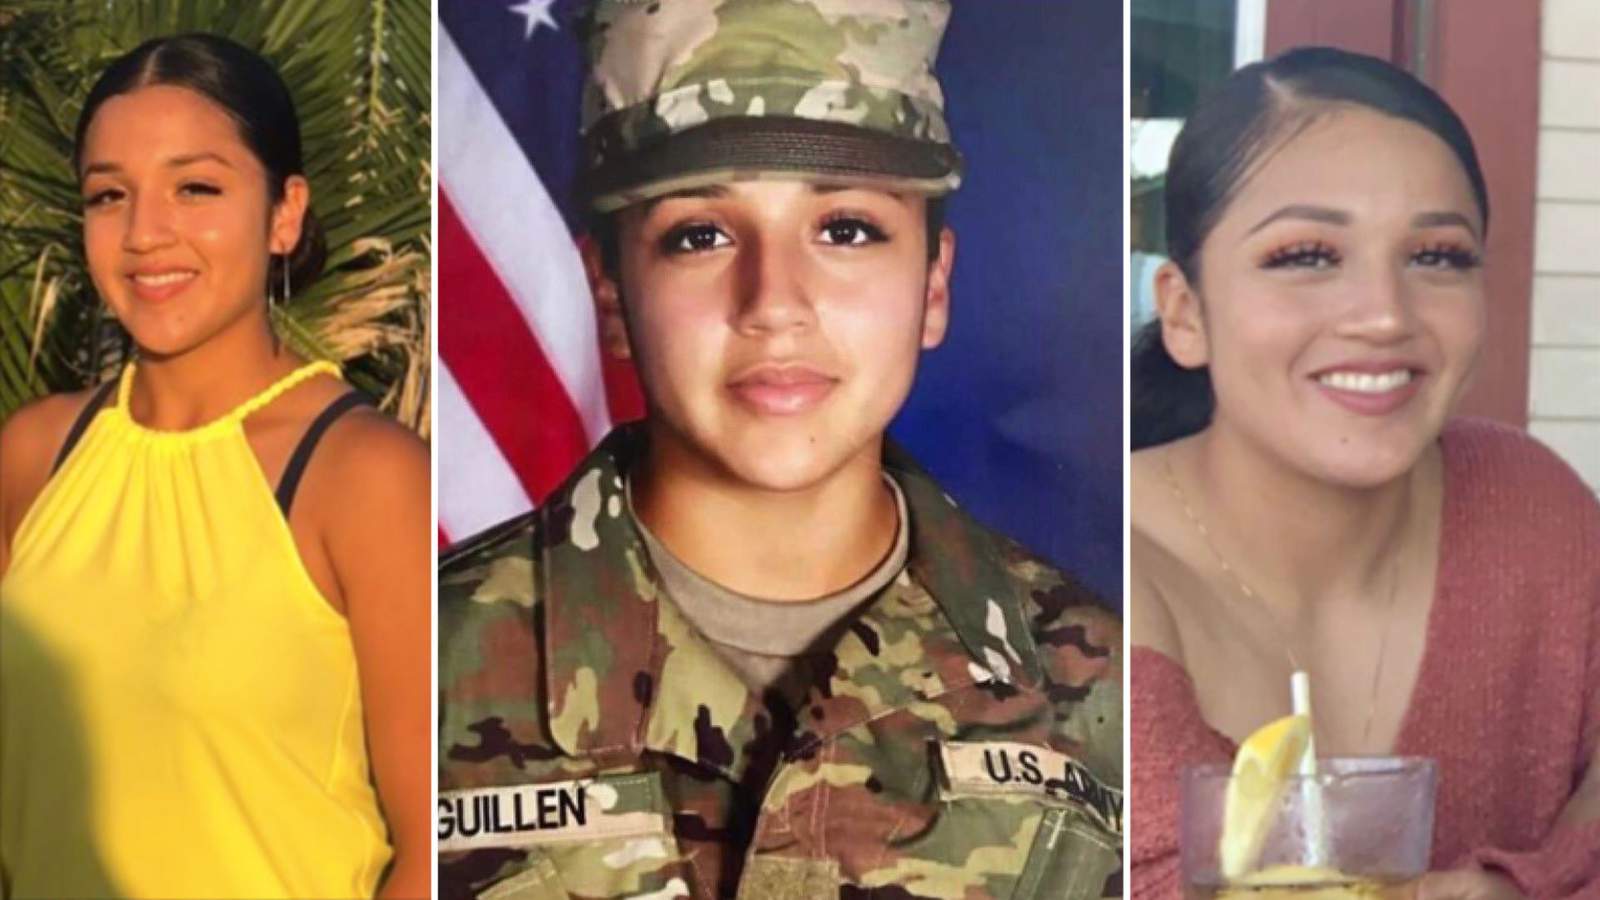 WATCH: Moments from Houstons tribute to Army Spc. Vanessa Guillen